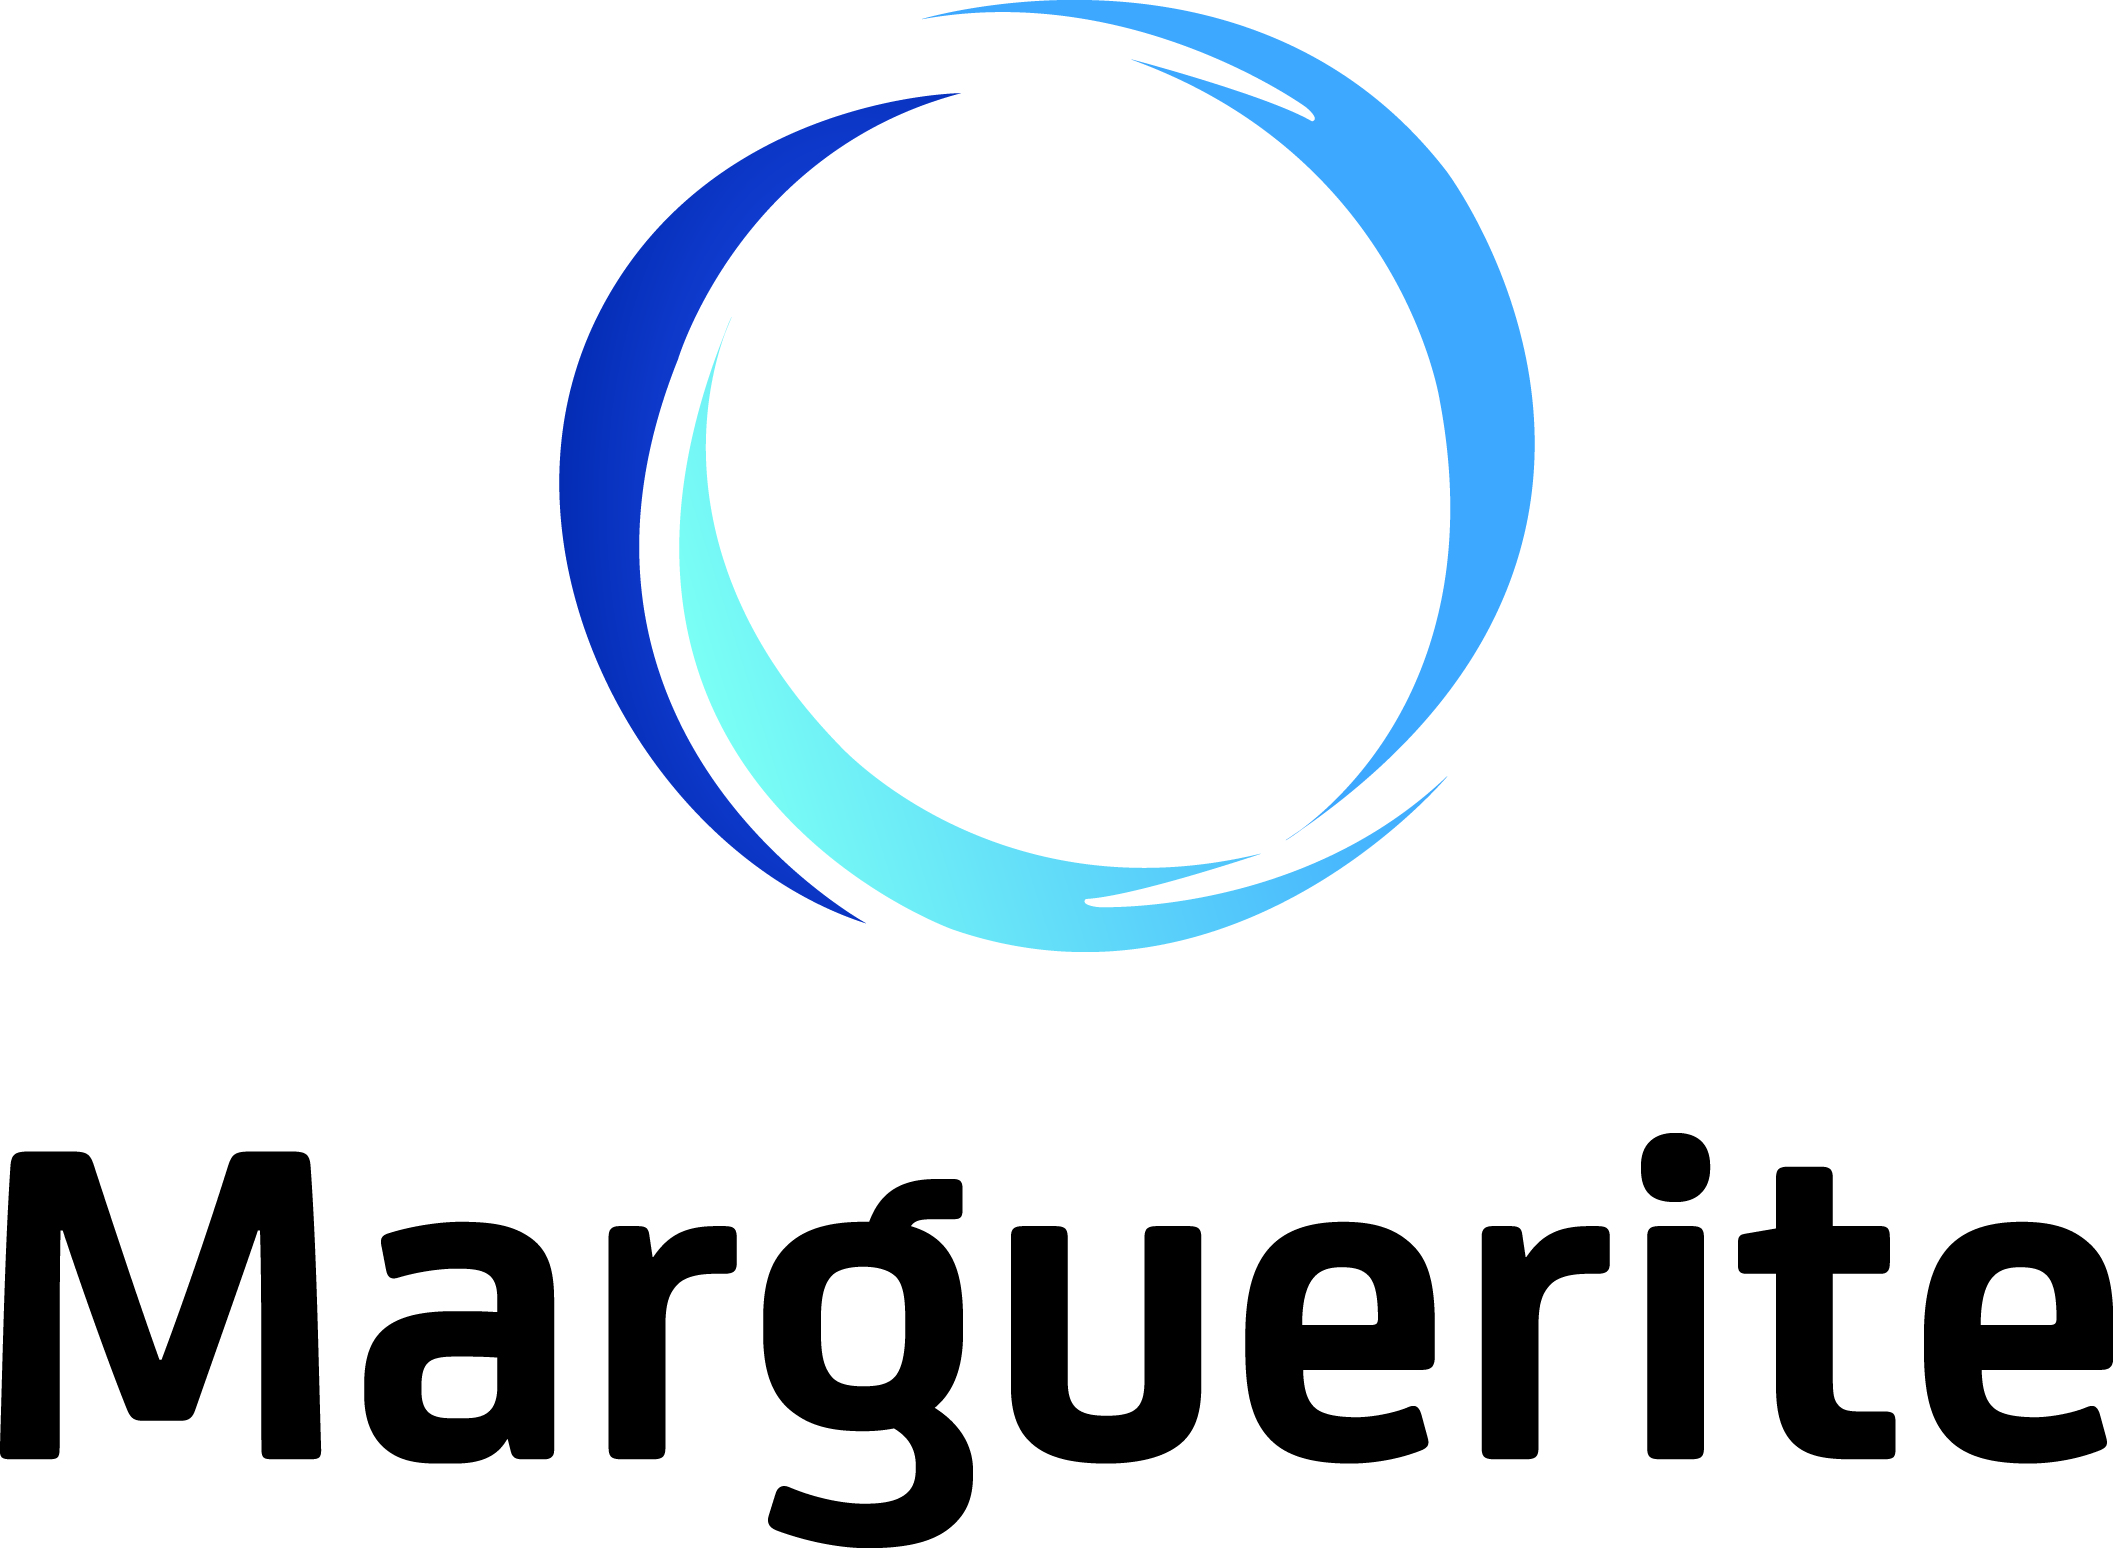 Margeurite